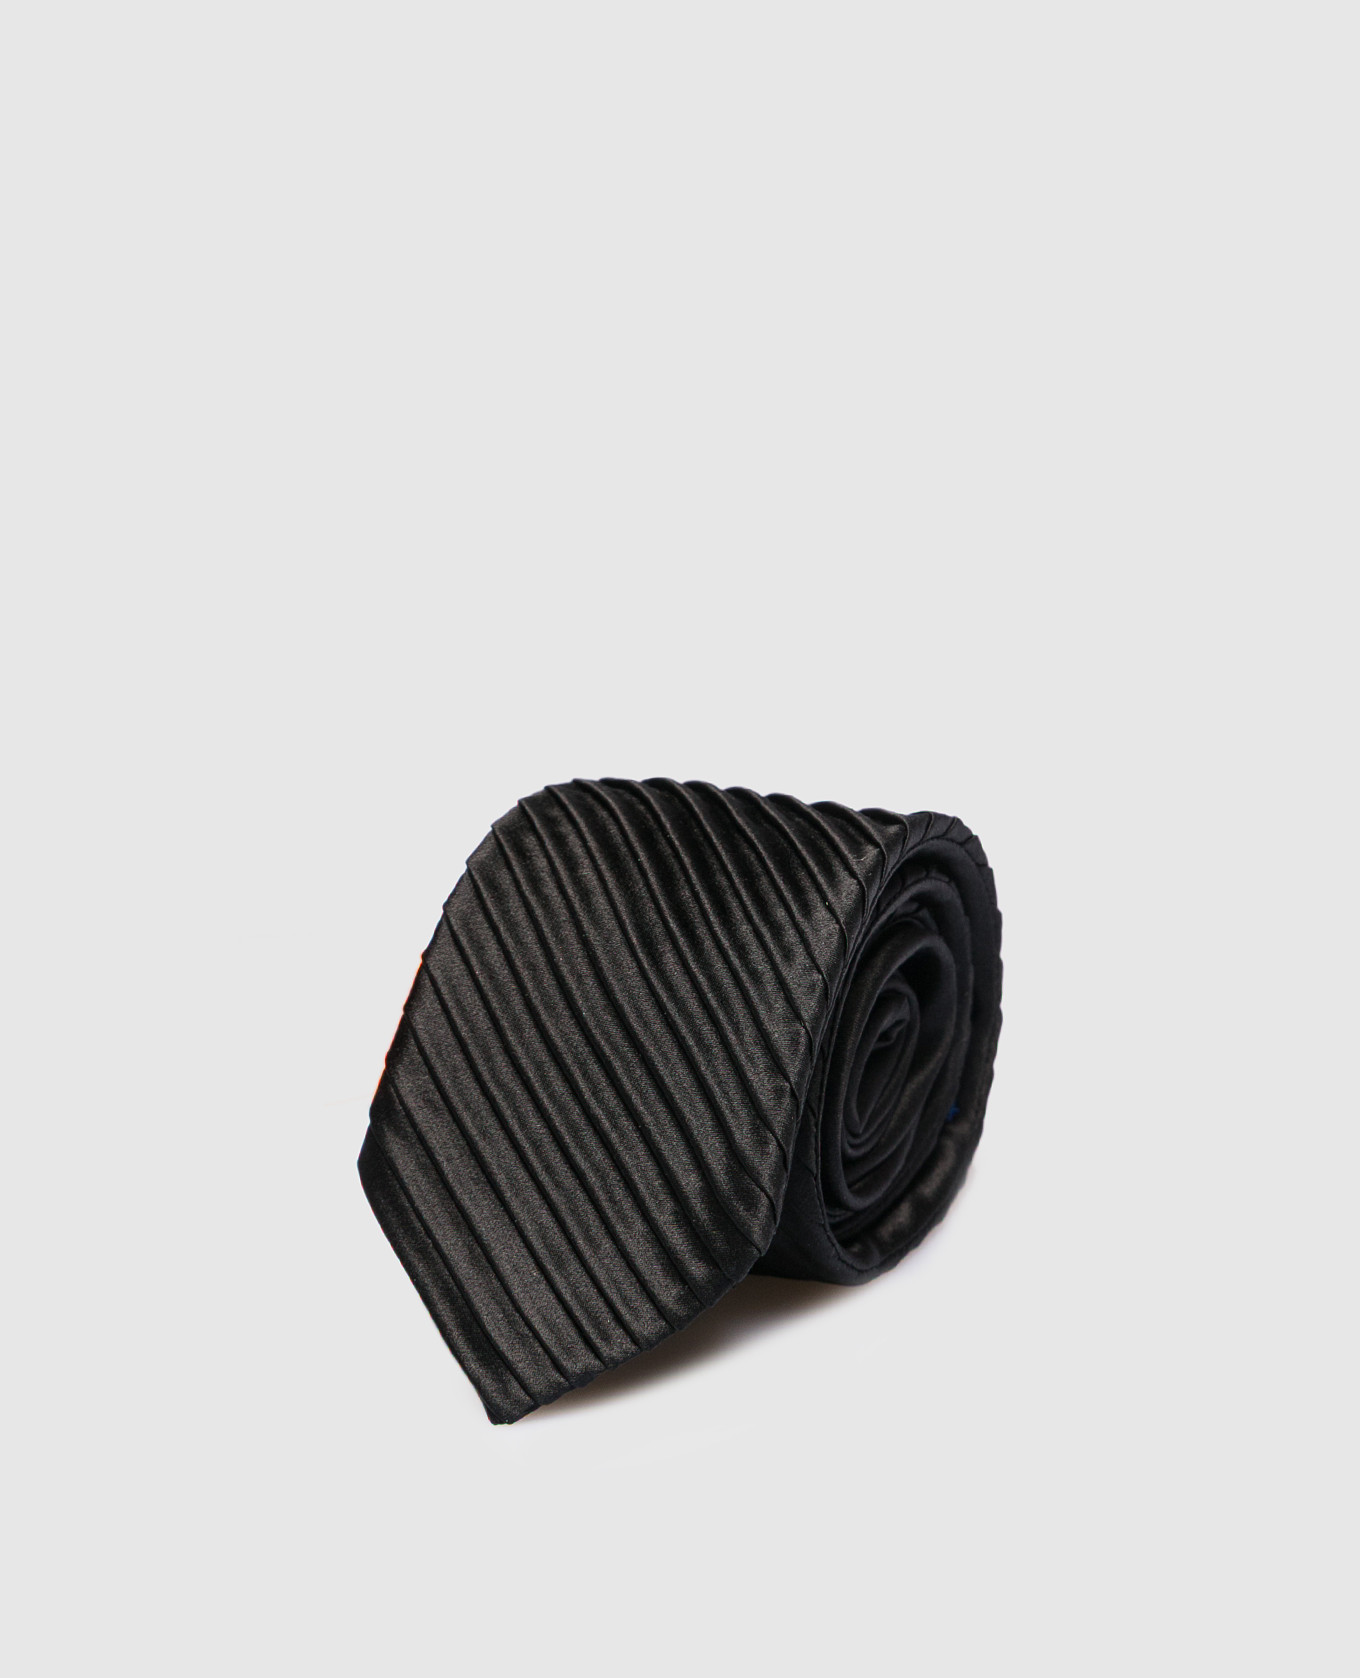 Children's black tie made of silk with pleating